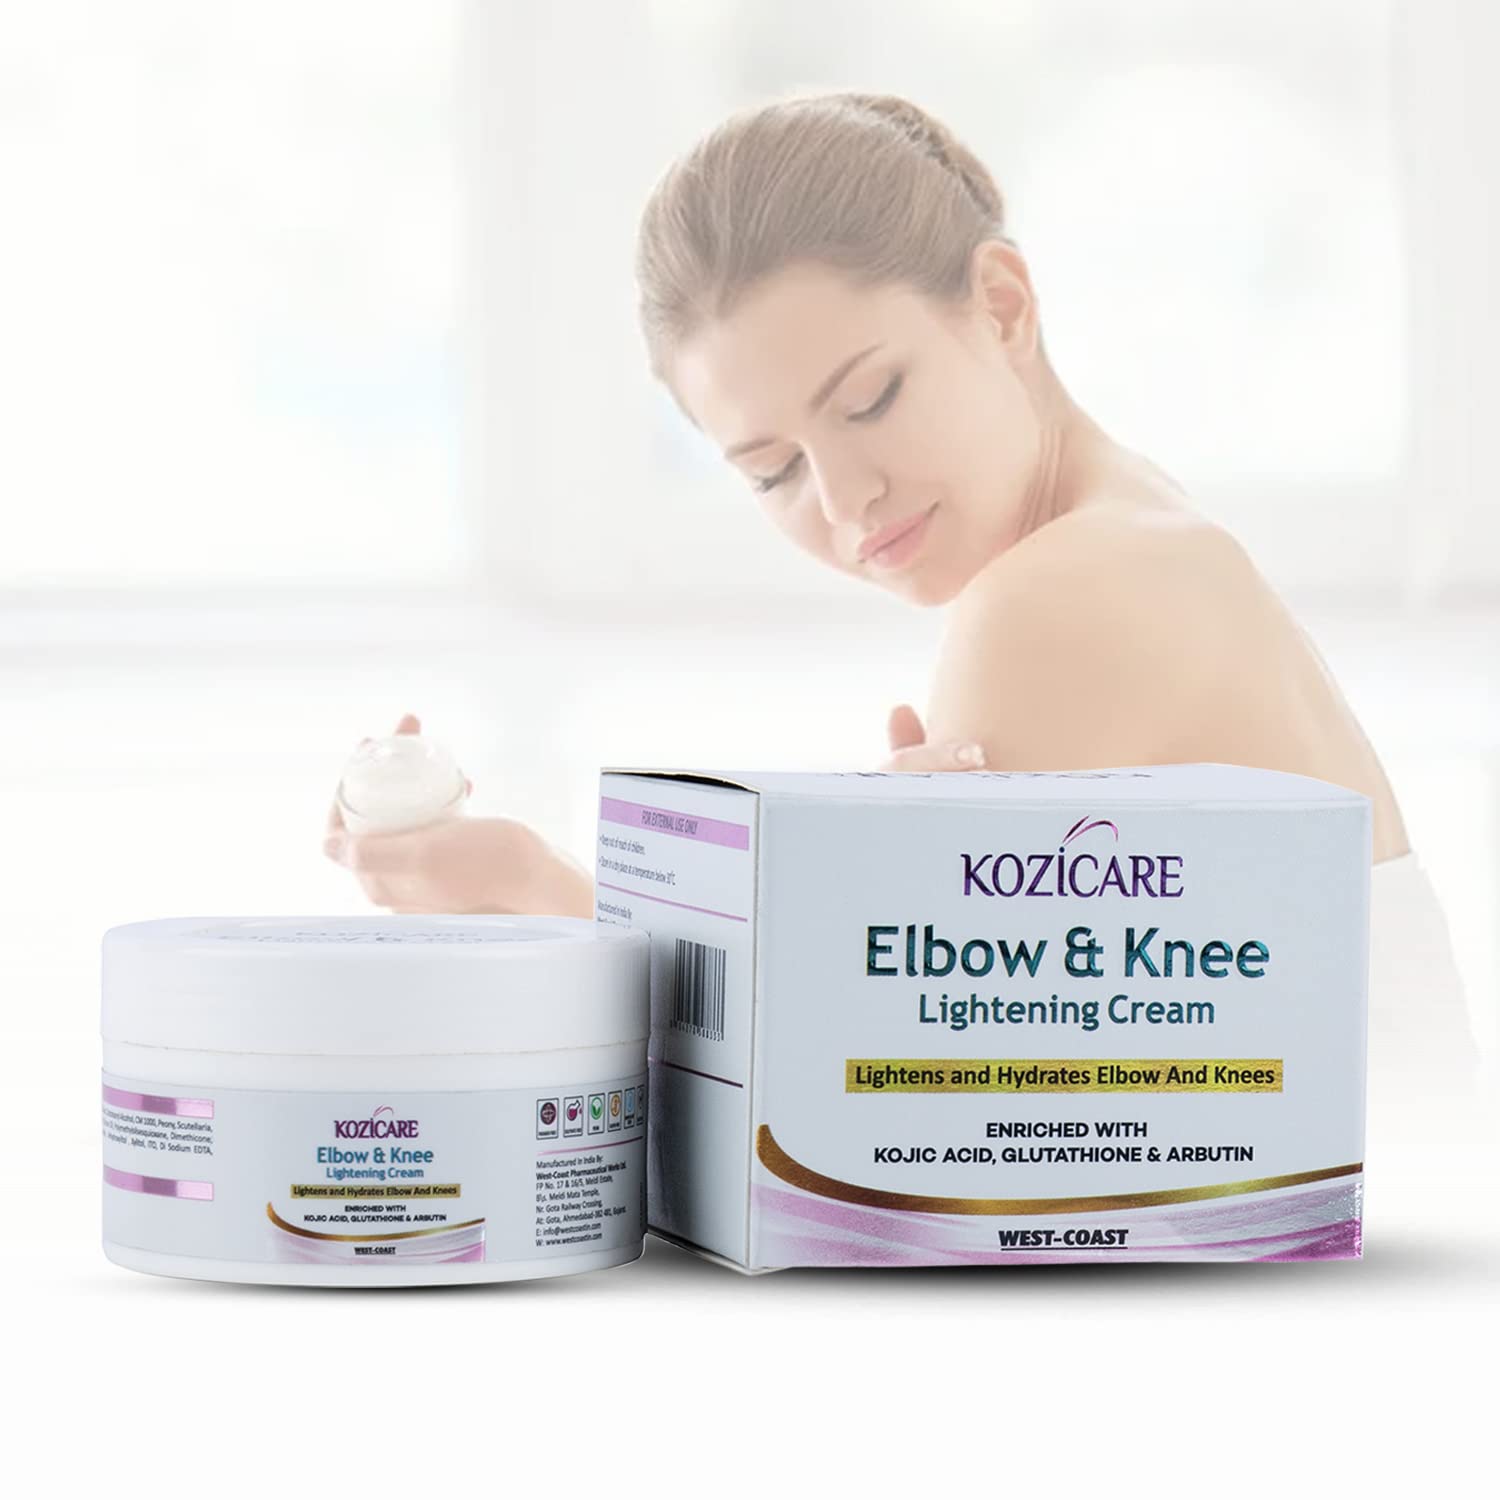 Kozicare Elbow & Knee Lightening Cream with 1% Glutathione, 1% Arbutin & 1% Kojic Acid |Improves Skin Texture |Hydrates and Softens Elbows & Knees | Eliminates Patchy Skin - 50gm